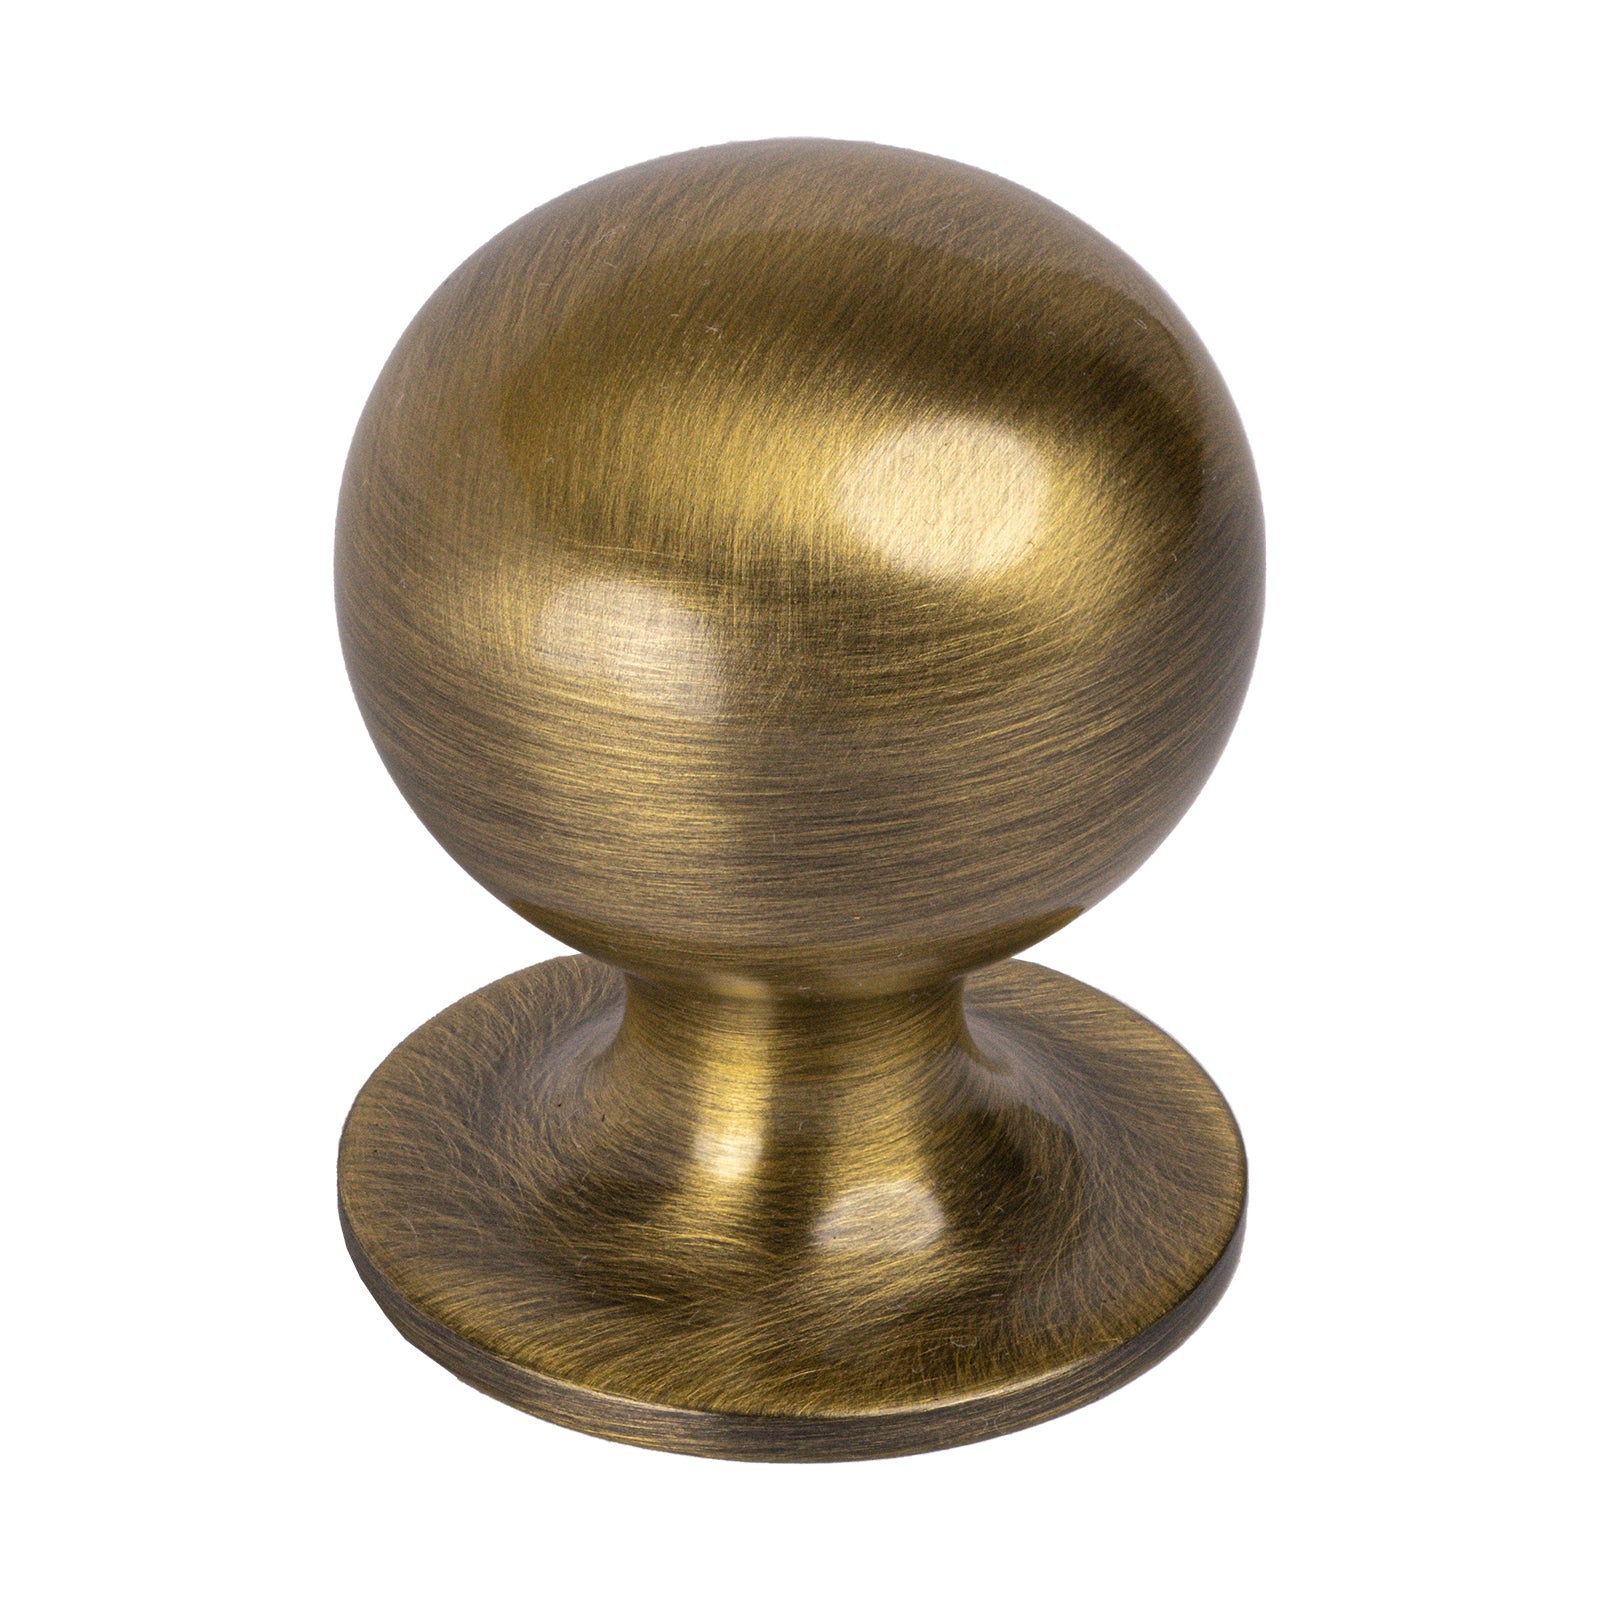 solid brass ball cabinet knobs